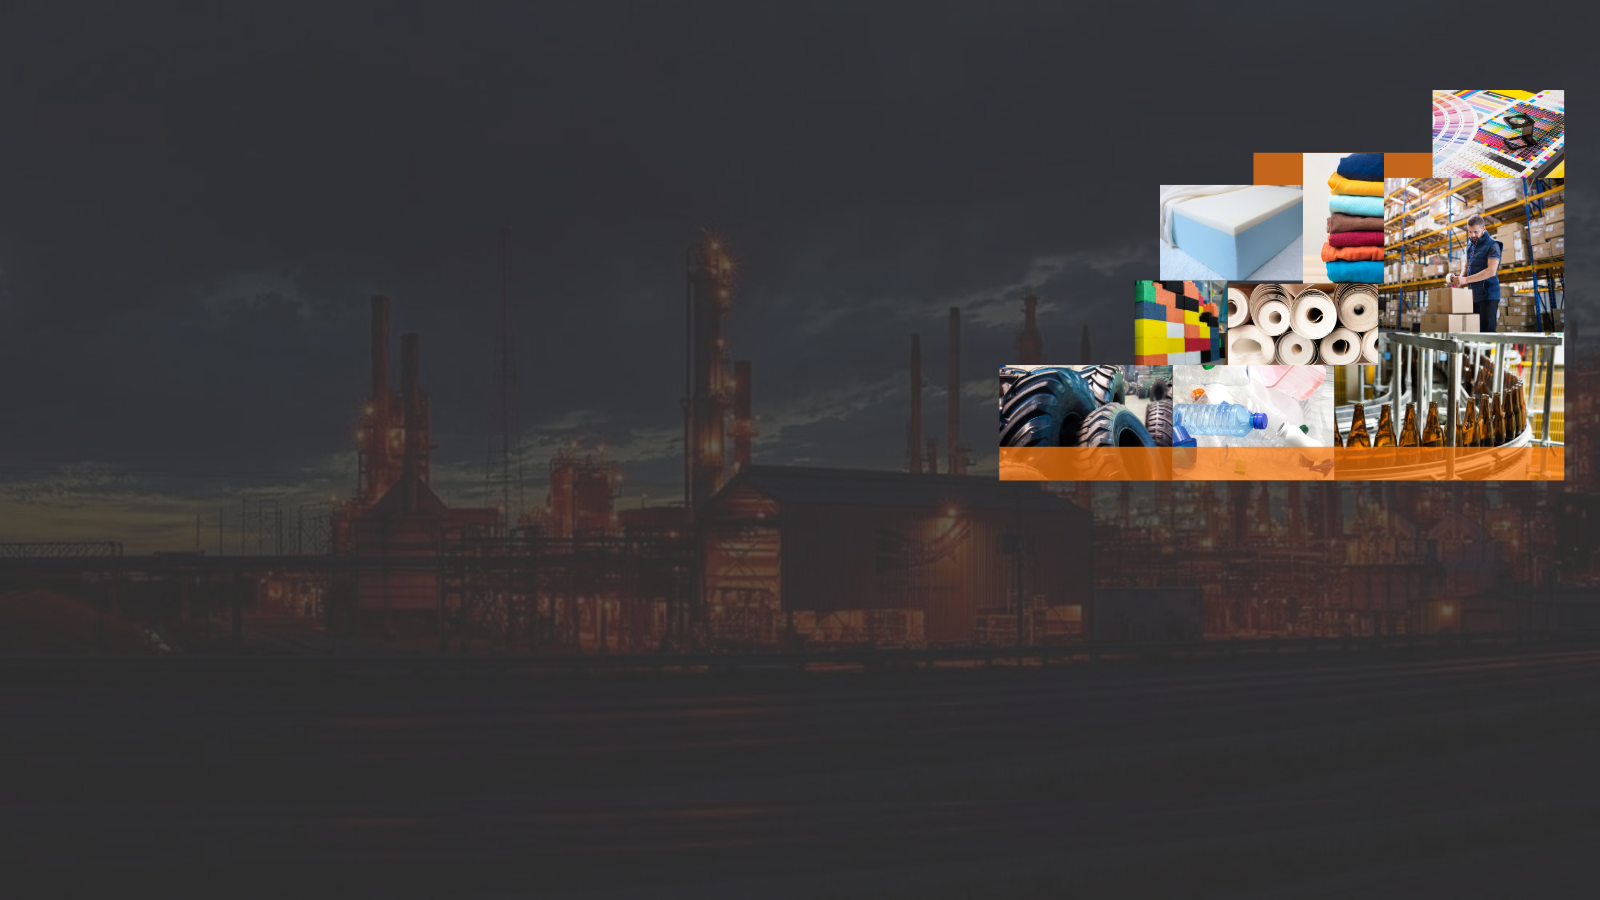 Image of a chemical manufacturing plant inlaid with images of products